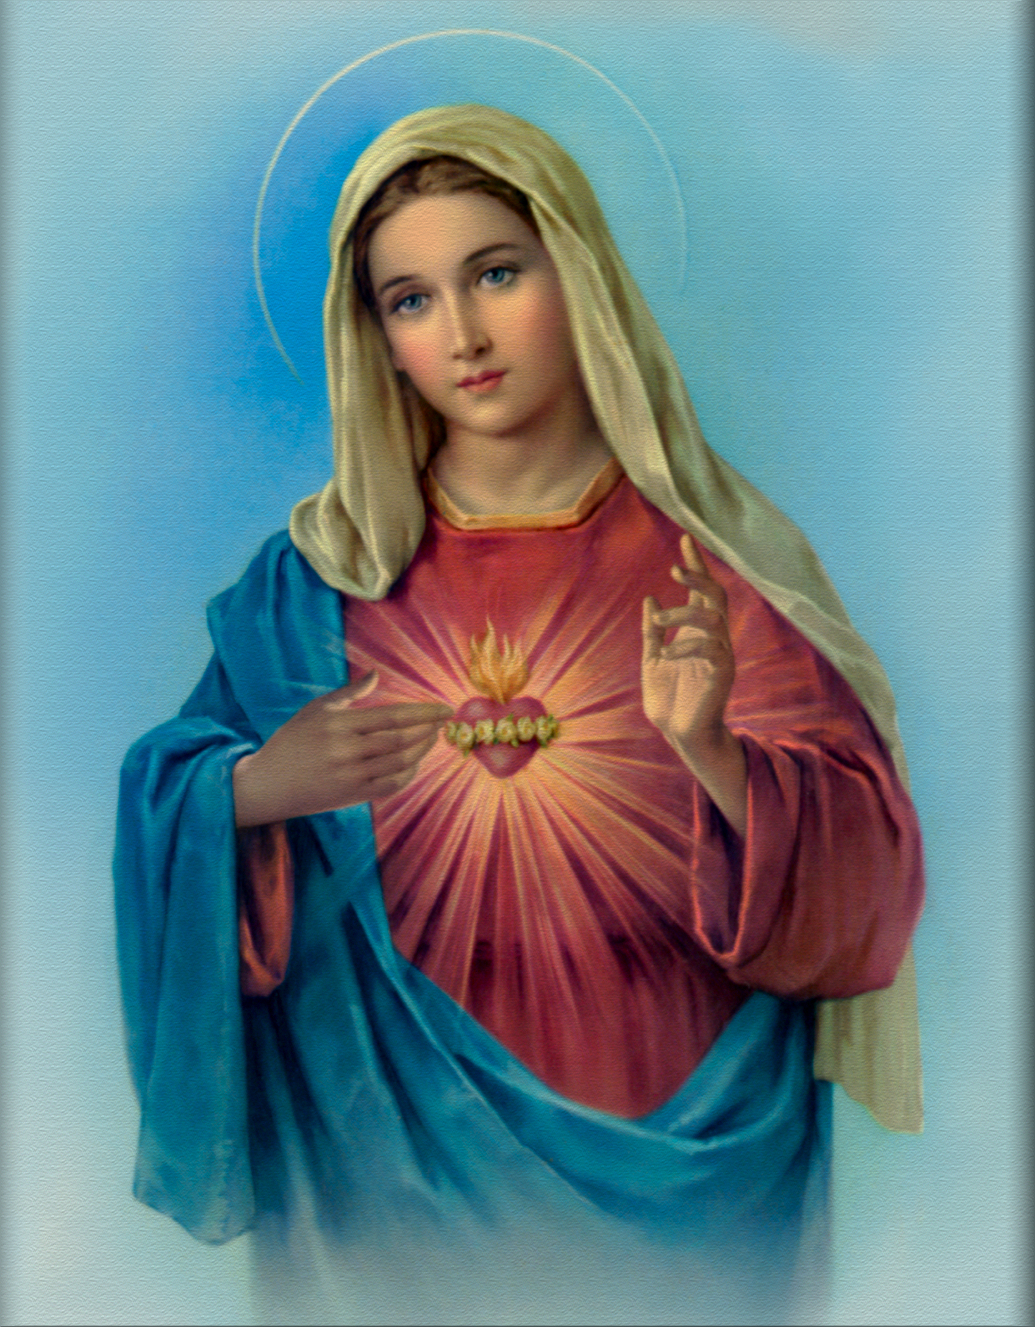 Infallible Catholic: The Blessed Virgin Mary - The New Ark of the Covenant